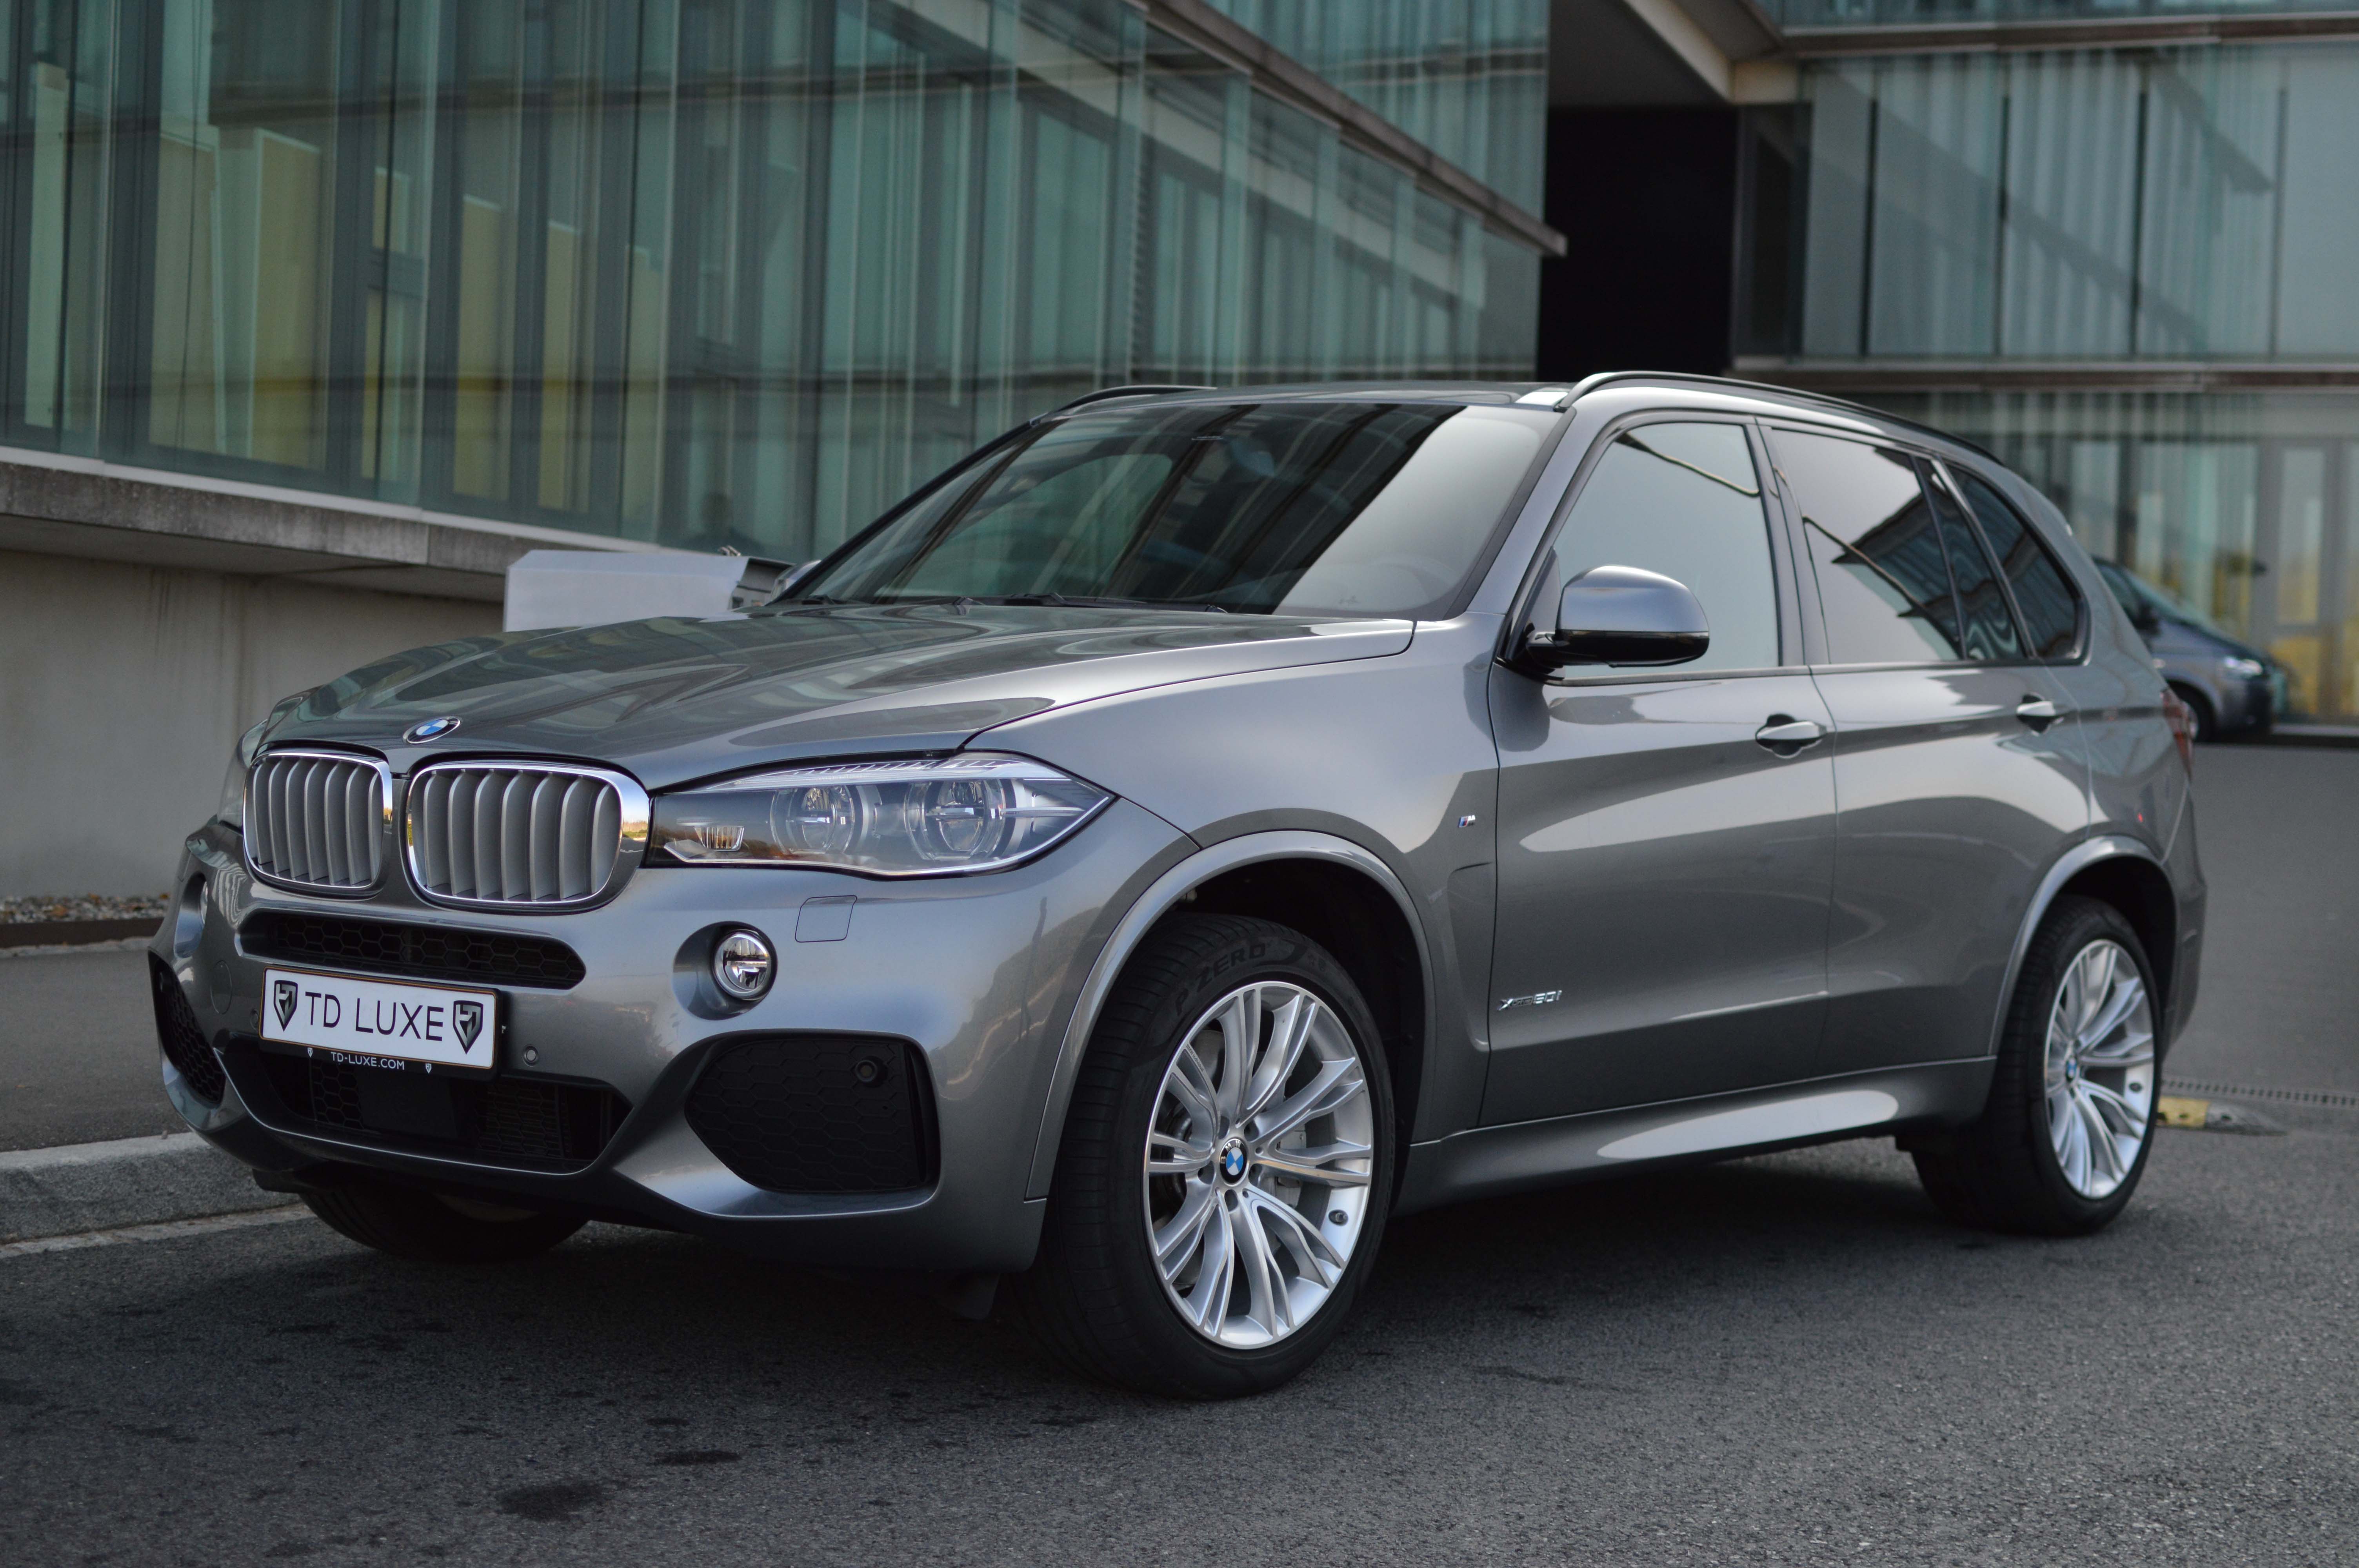 BMW X5 50i TD Luxe